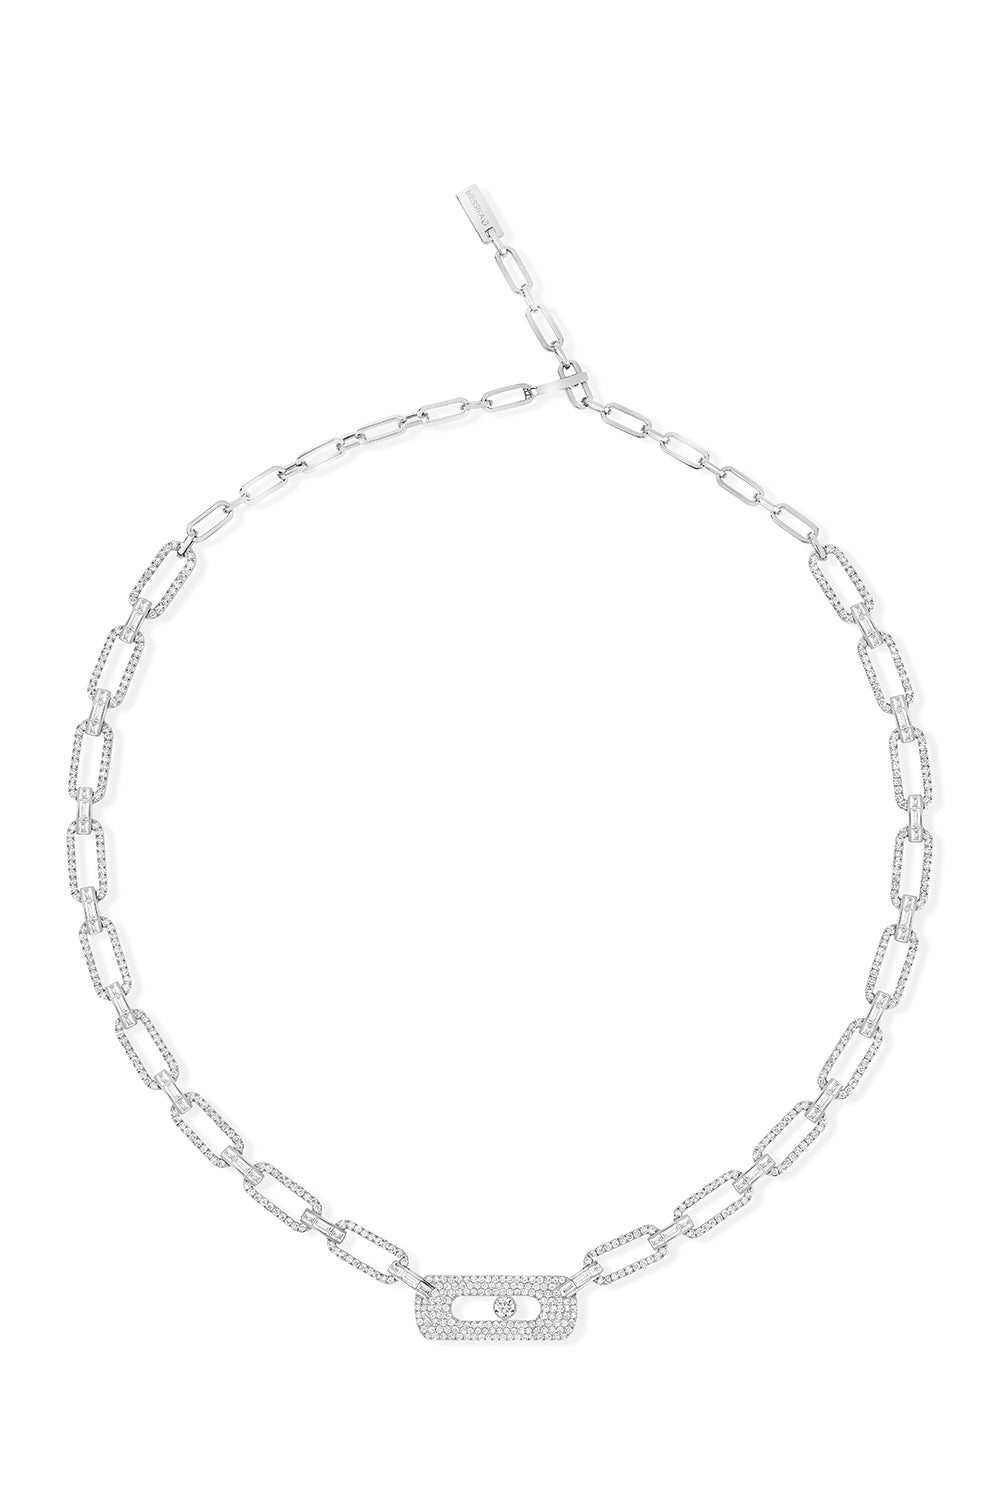 MESSIKA-Move Link Full Diamond Curb Necklace-WHITE GOLD